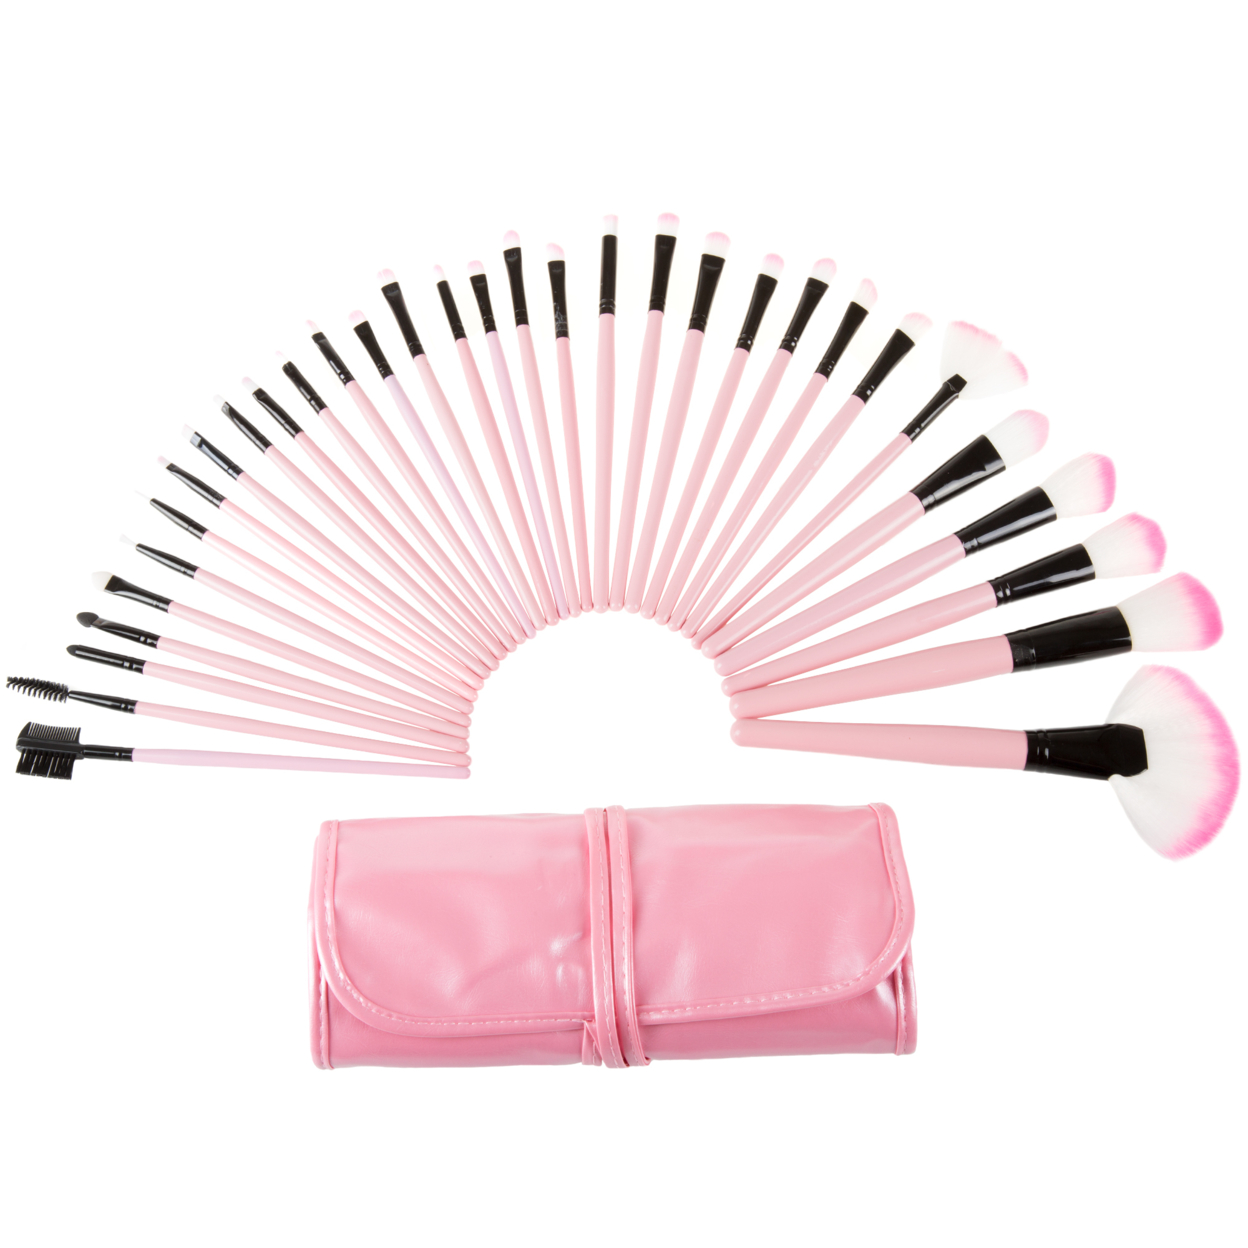 Everyday Home 32 Piece Makeup Brush Set With Pink Pouch